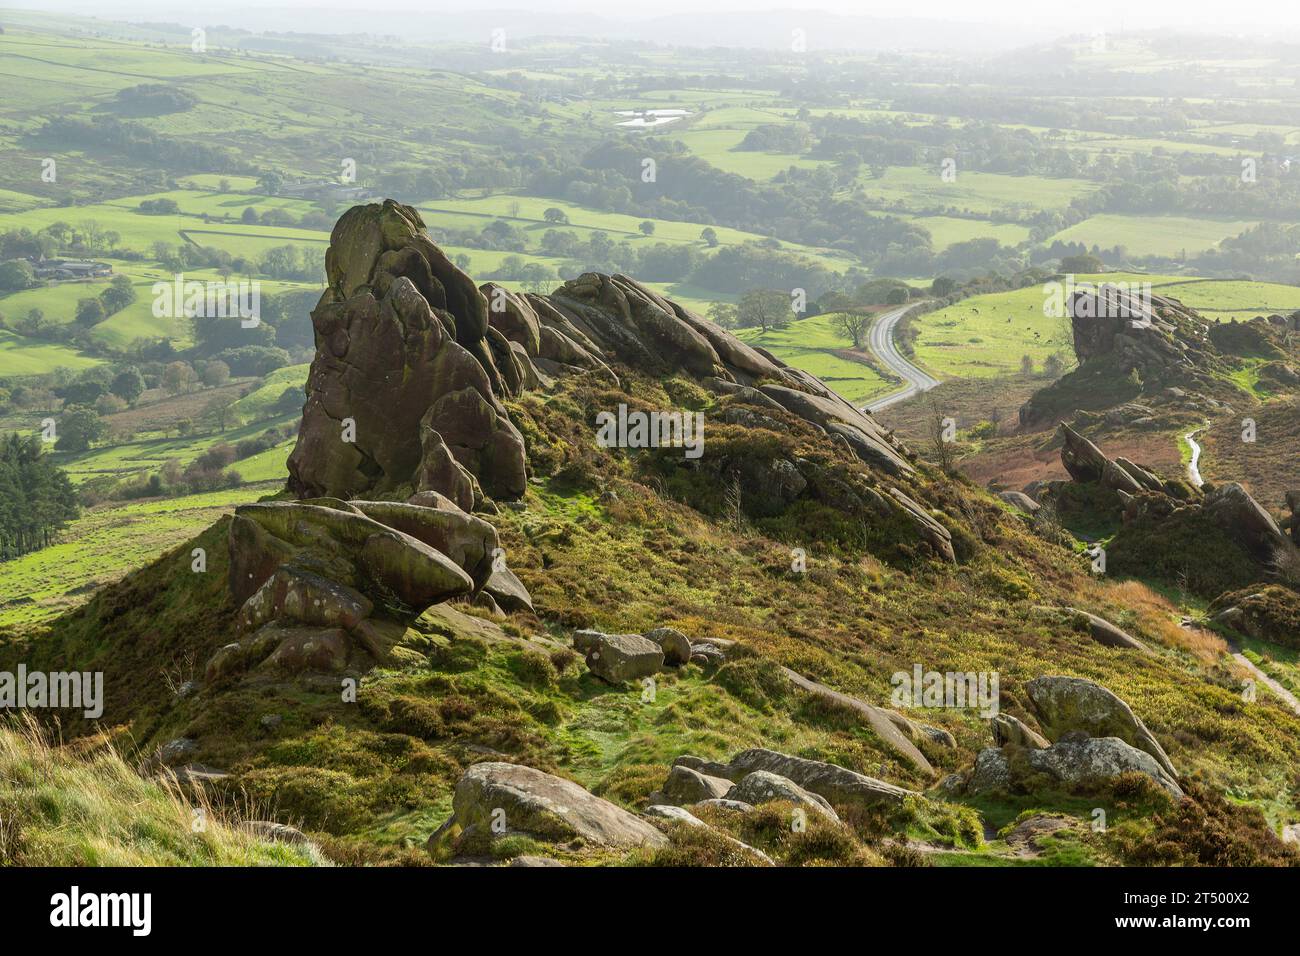 Looking South West along the Ramshaw Rocks, near Upper Hulme, Staffordshire Peak District, England Stock Photo